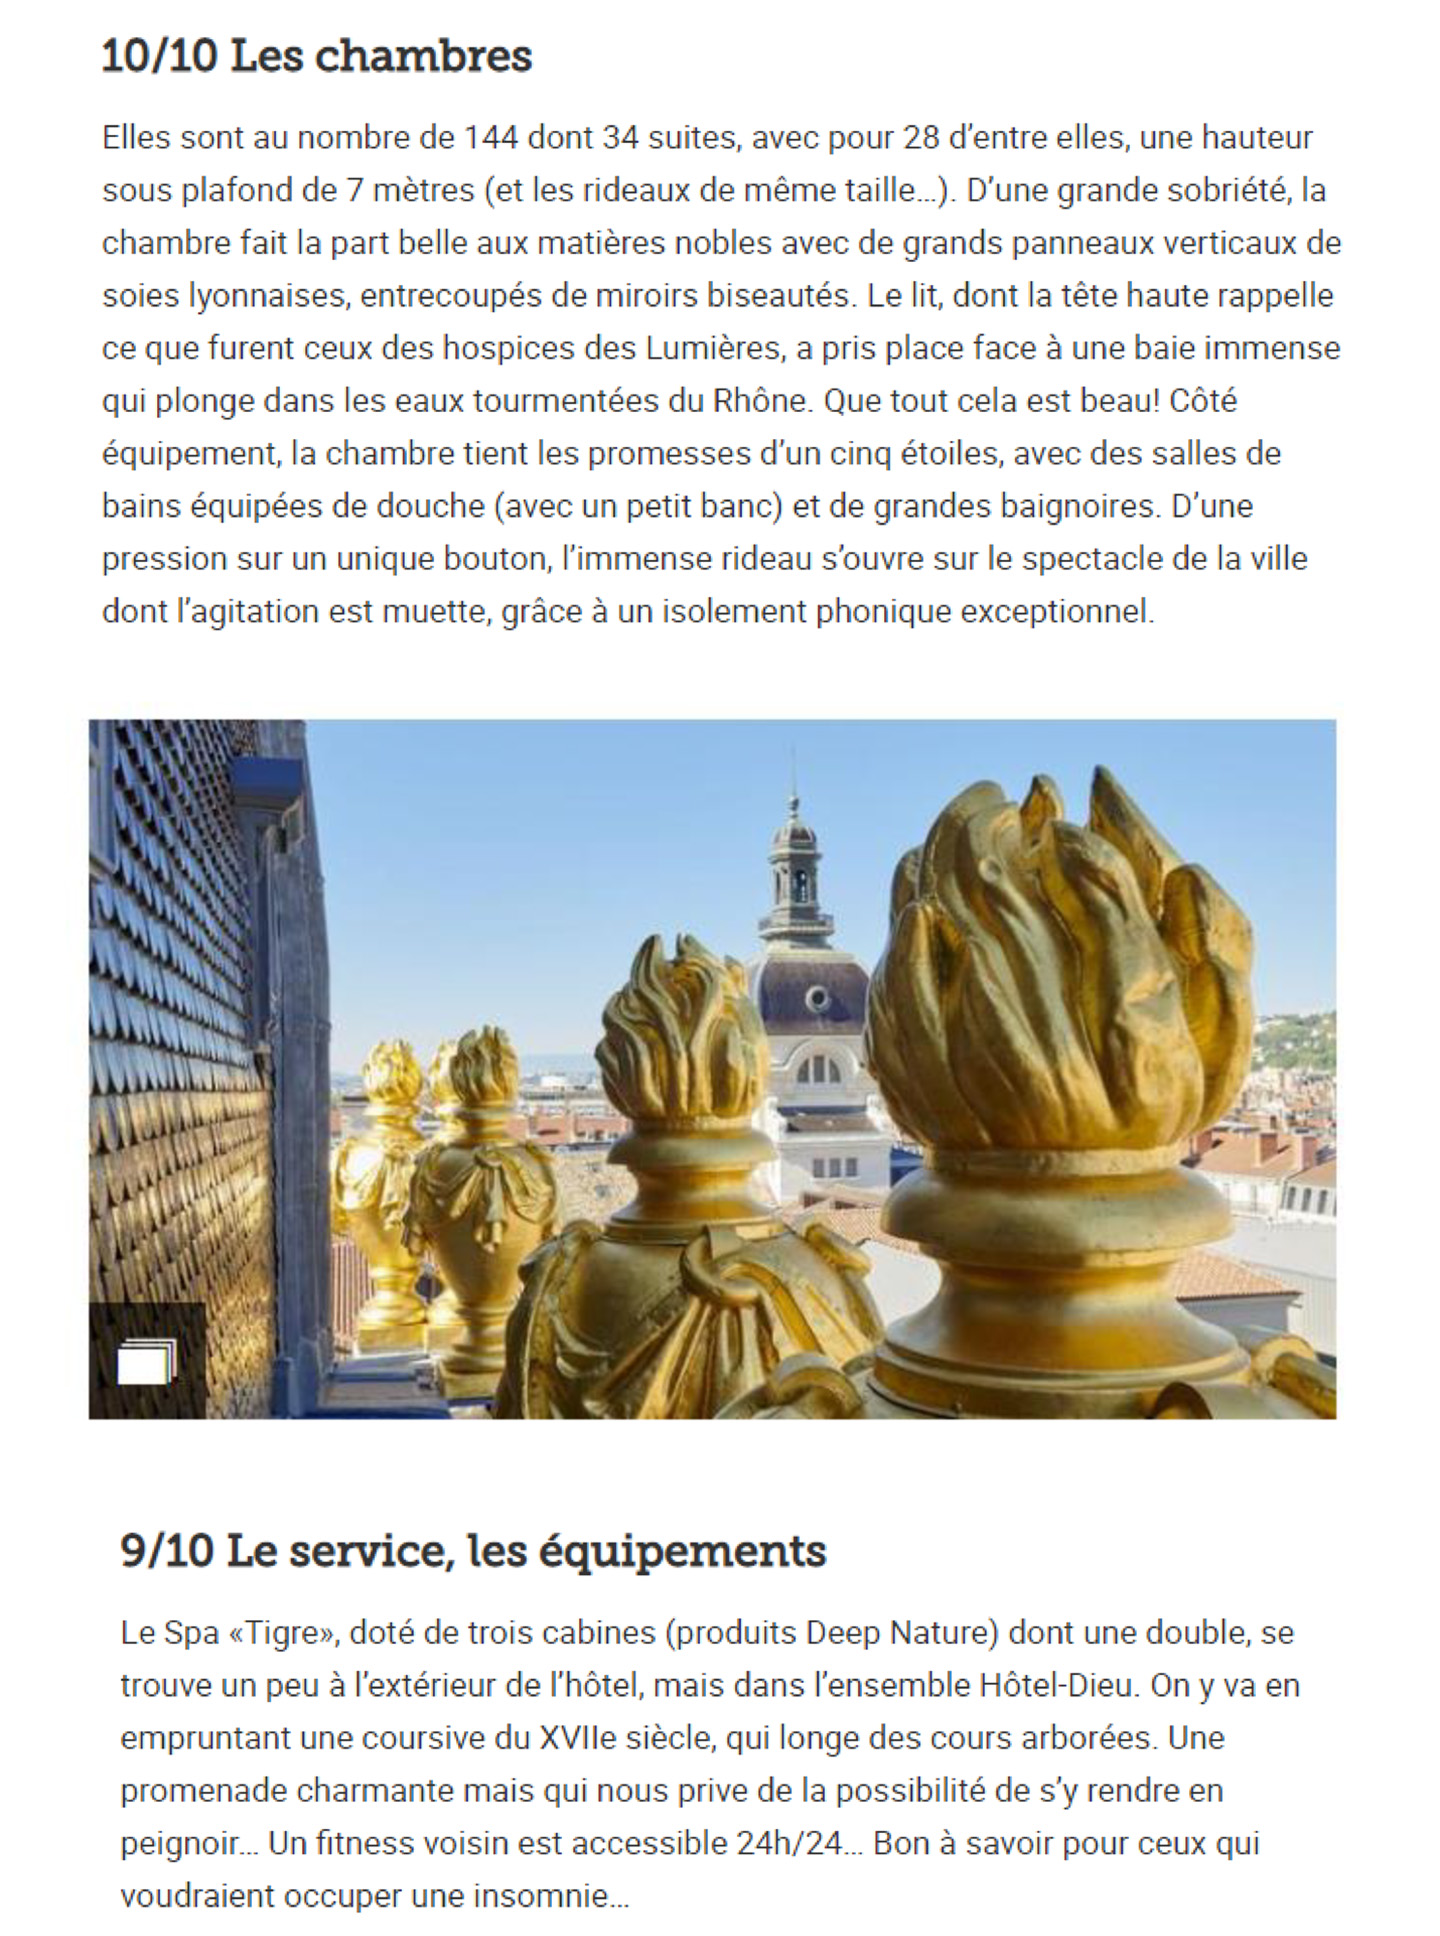 Article on the InterContinental Lyon - Hôtel Dieu realized by the studio jean-Philippe Nuel in the figaro magazine, new lifestyle hotel, luxury interior design, paris center, french luxury hotel